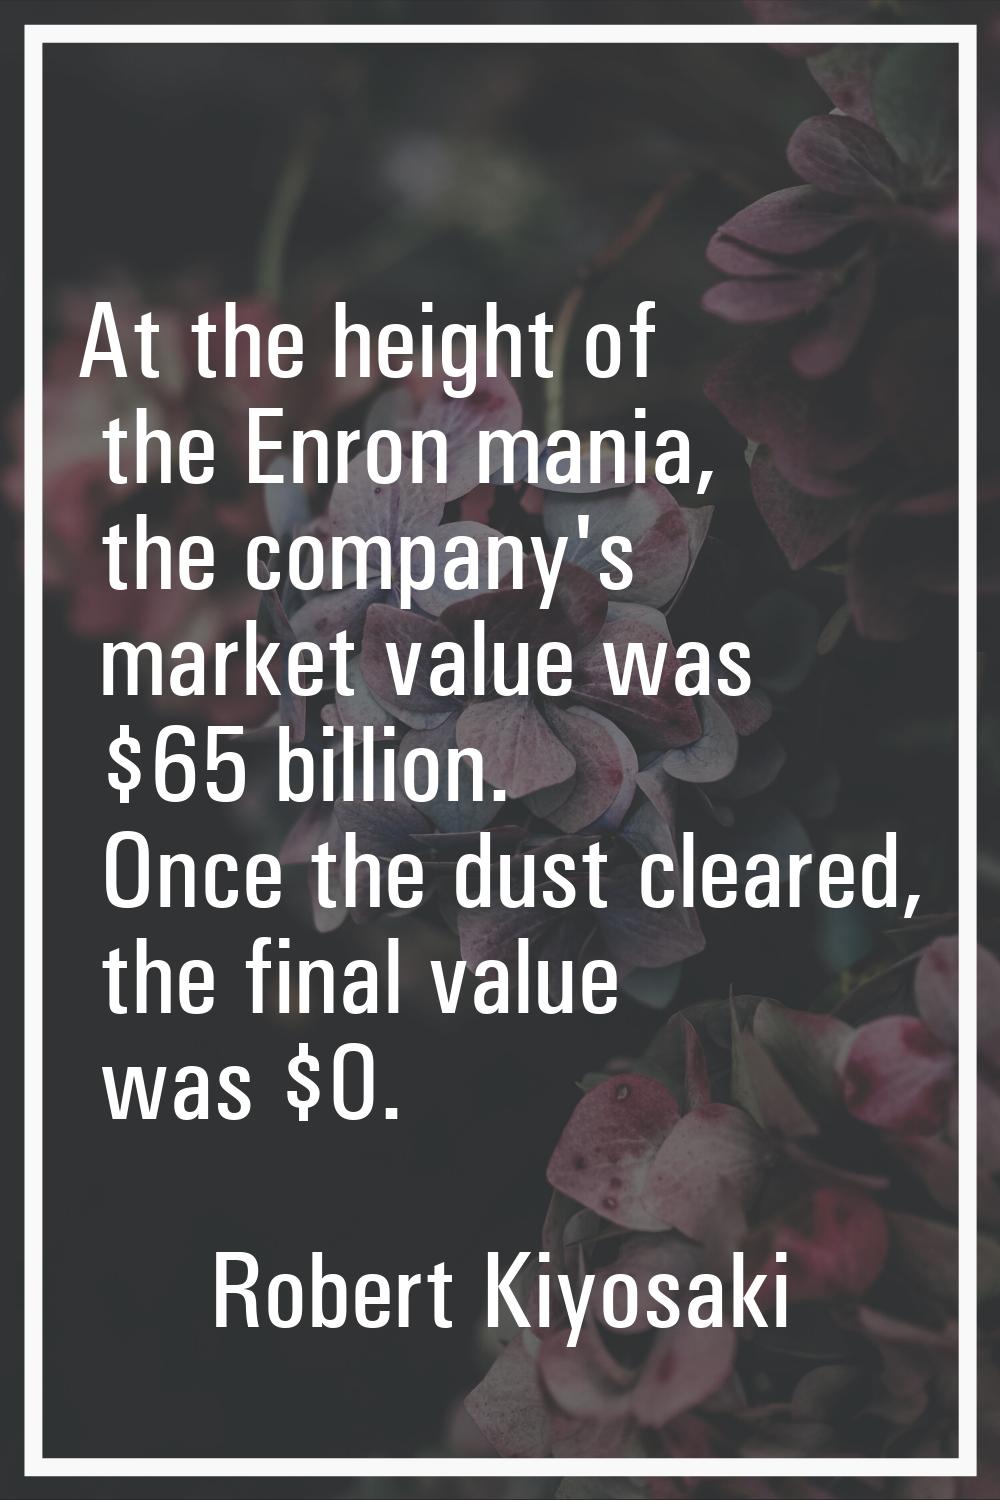 At the height of the Enron mania, the company's market value was $65 billion. Once the dust cleared